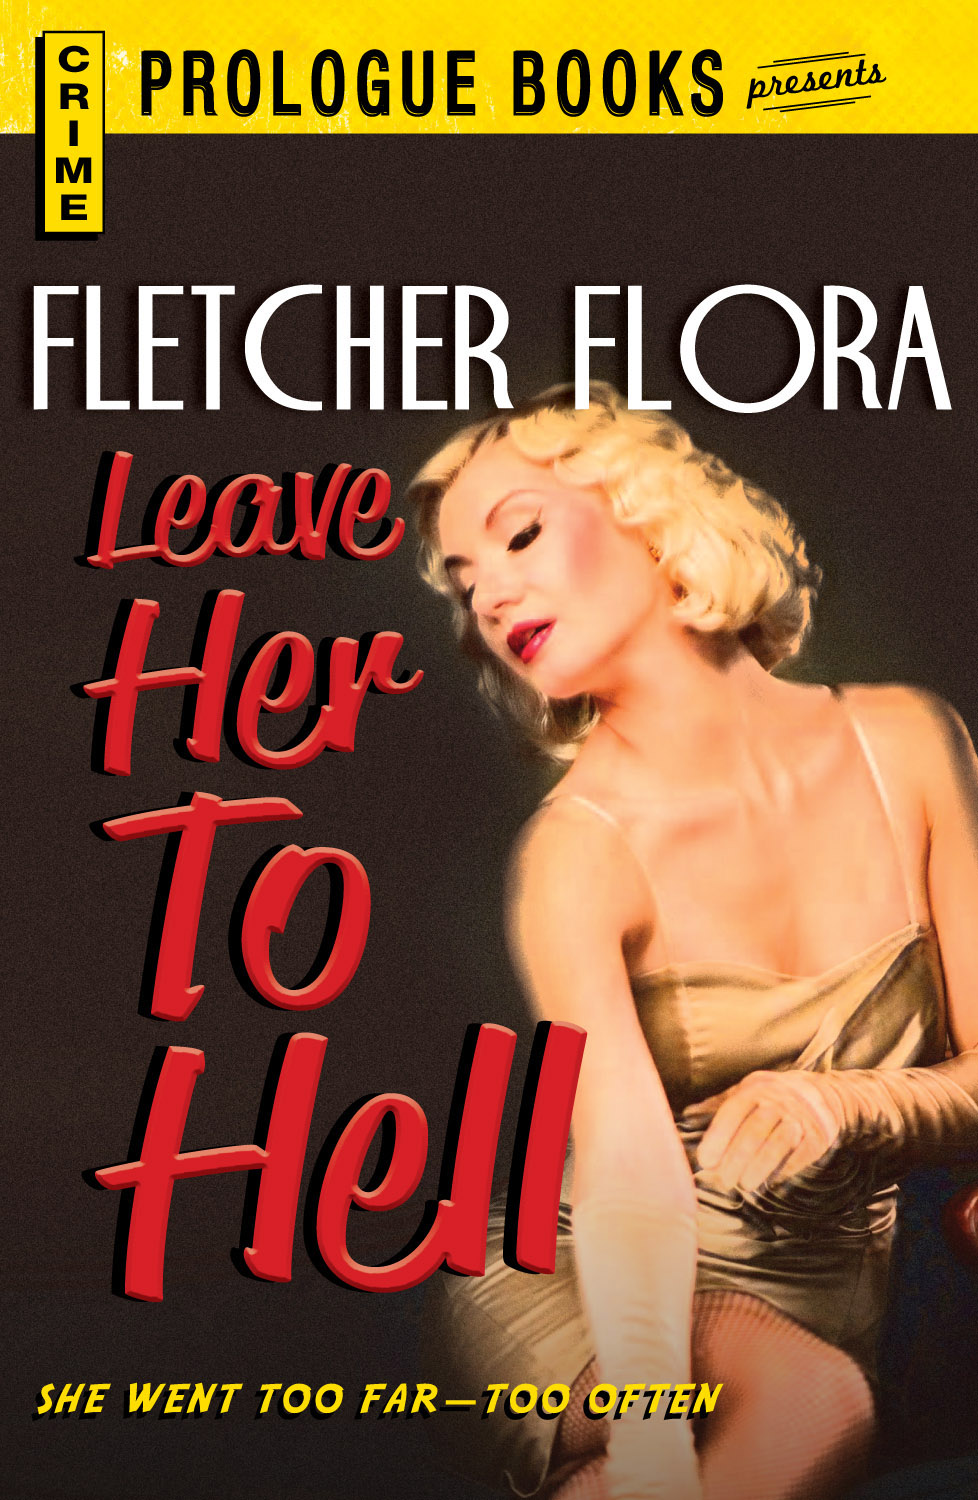 Leave Her to Hell (1958) by Flora, Fletcher